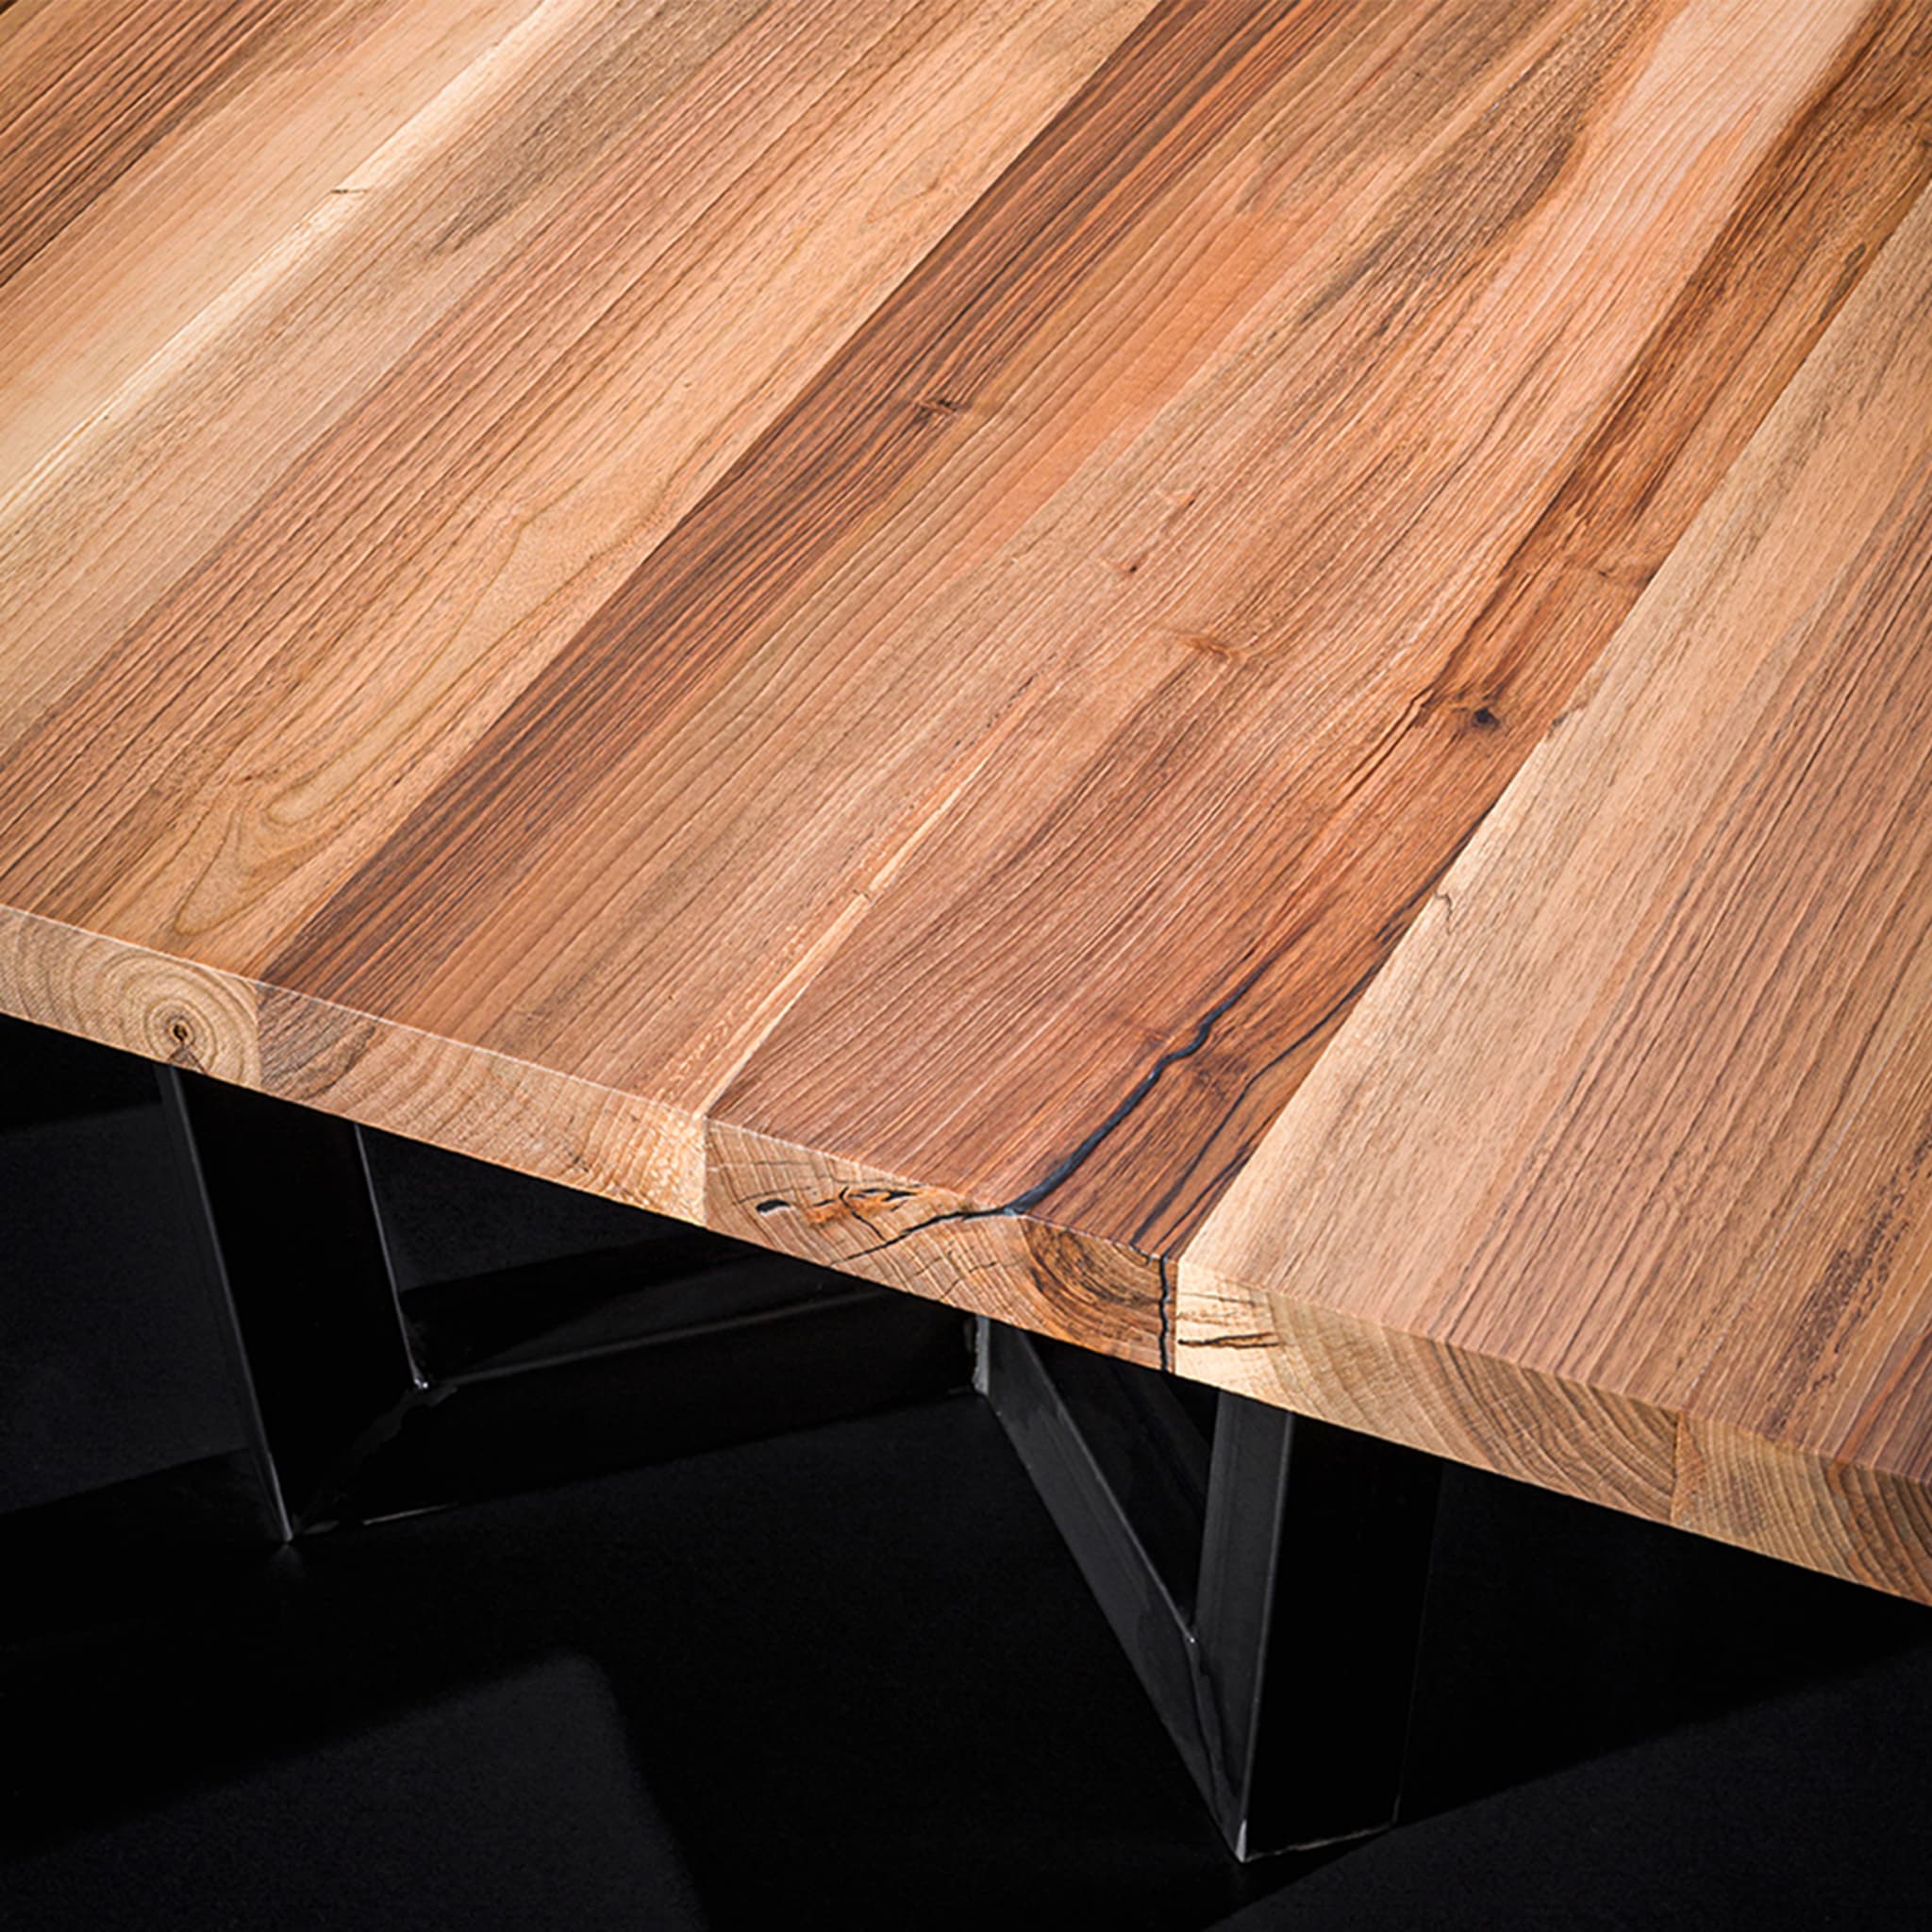 Square walnut dining table - Alternative view 3